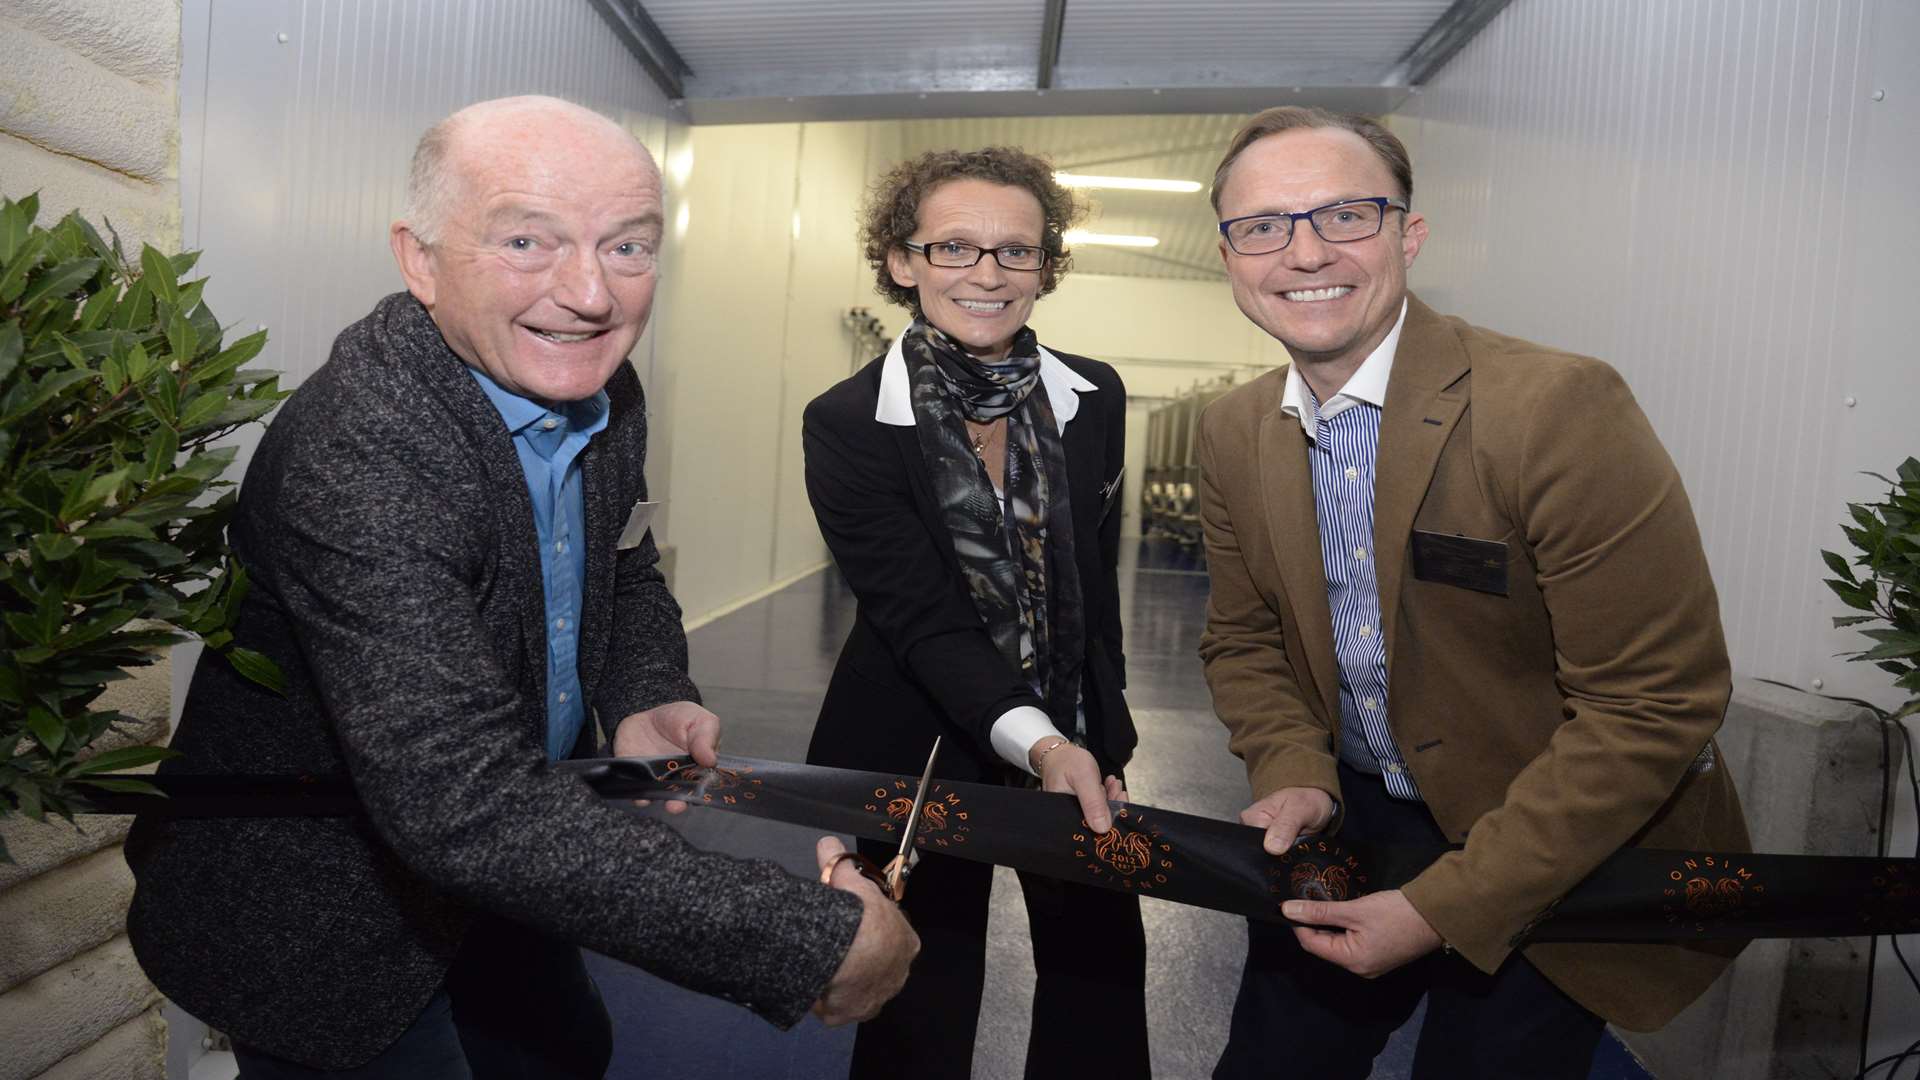 Wine expert Oz Clarke with Ruth and Charles Simpson at the opening of Simpsons Winery at Barham Picture: Chris Davey